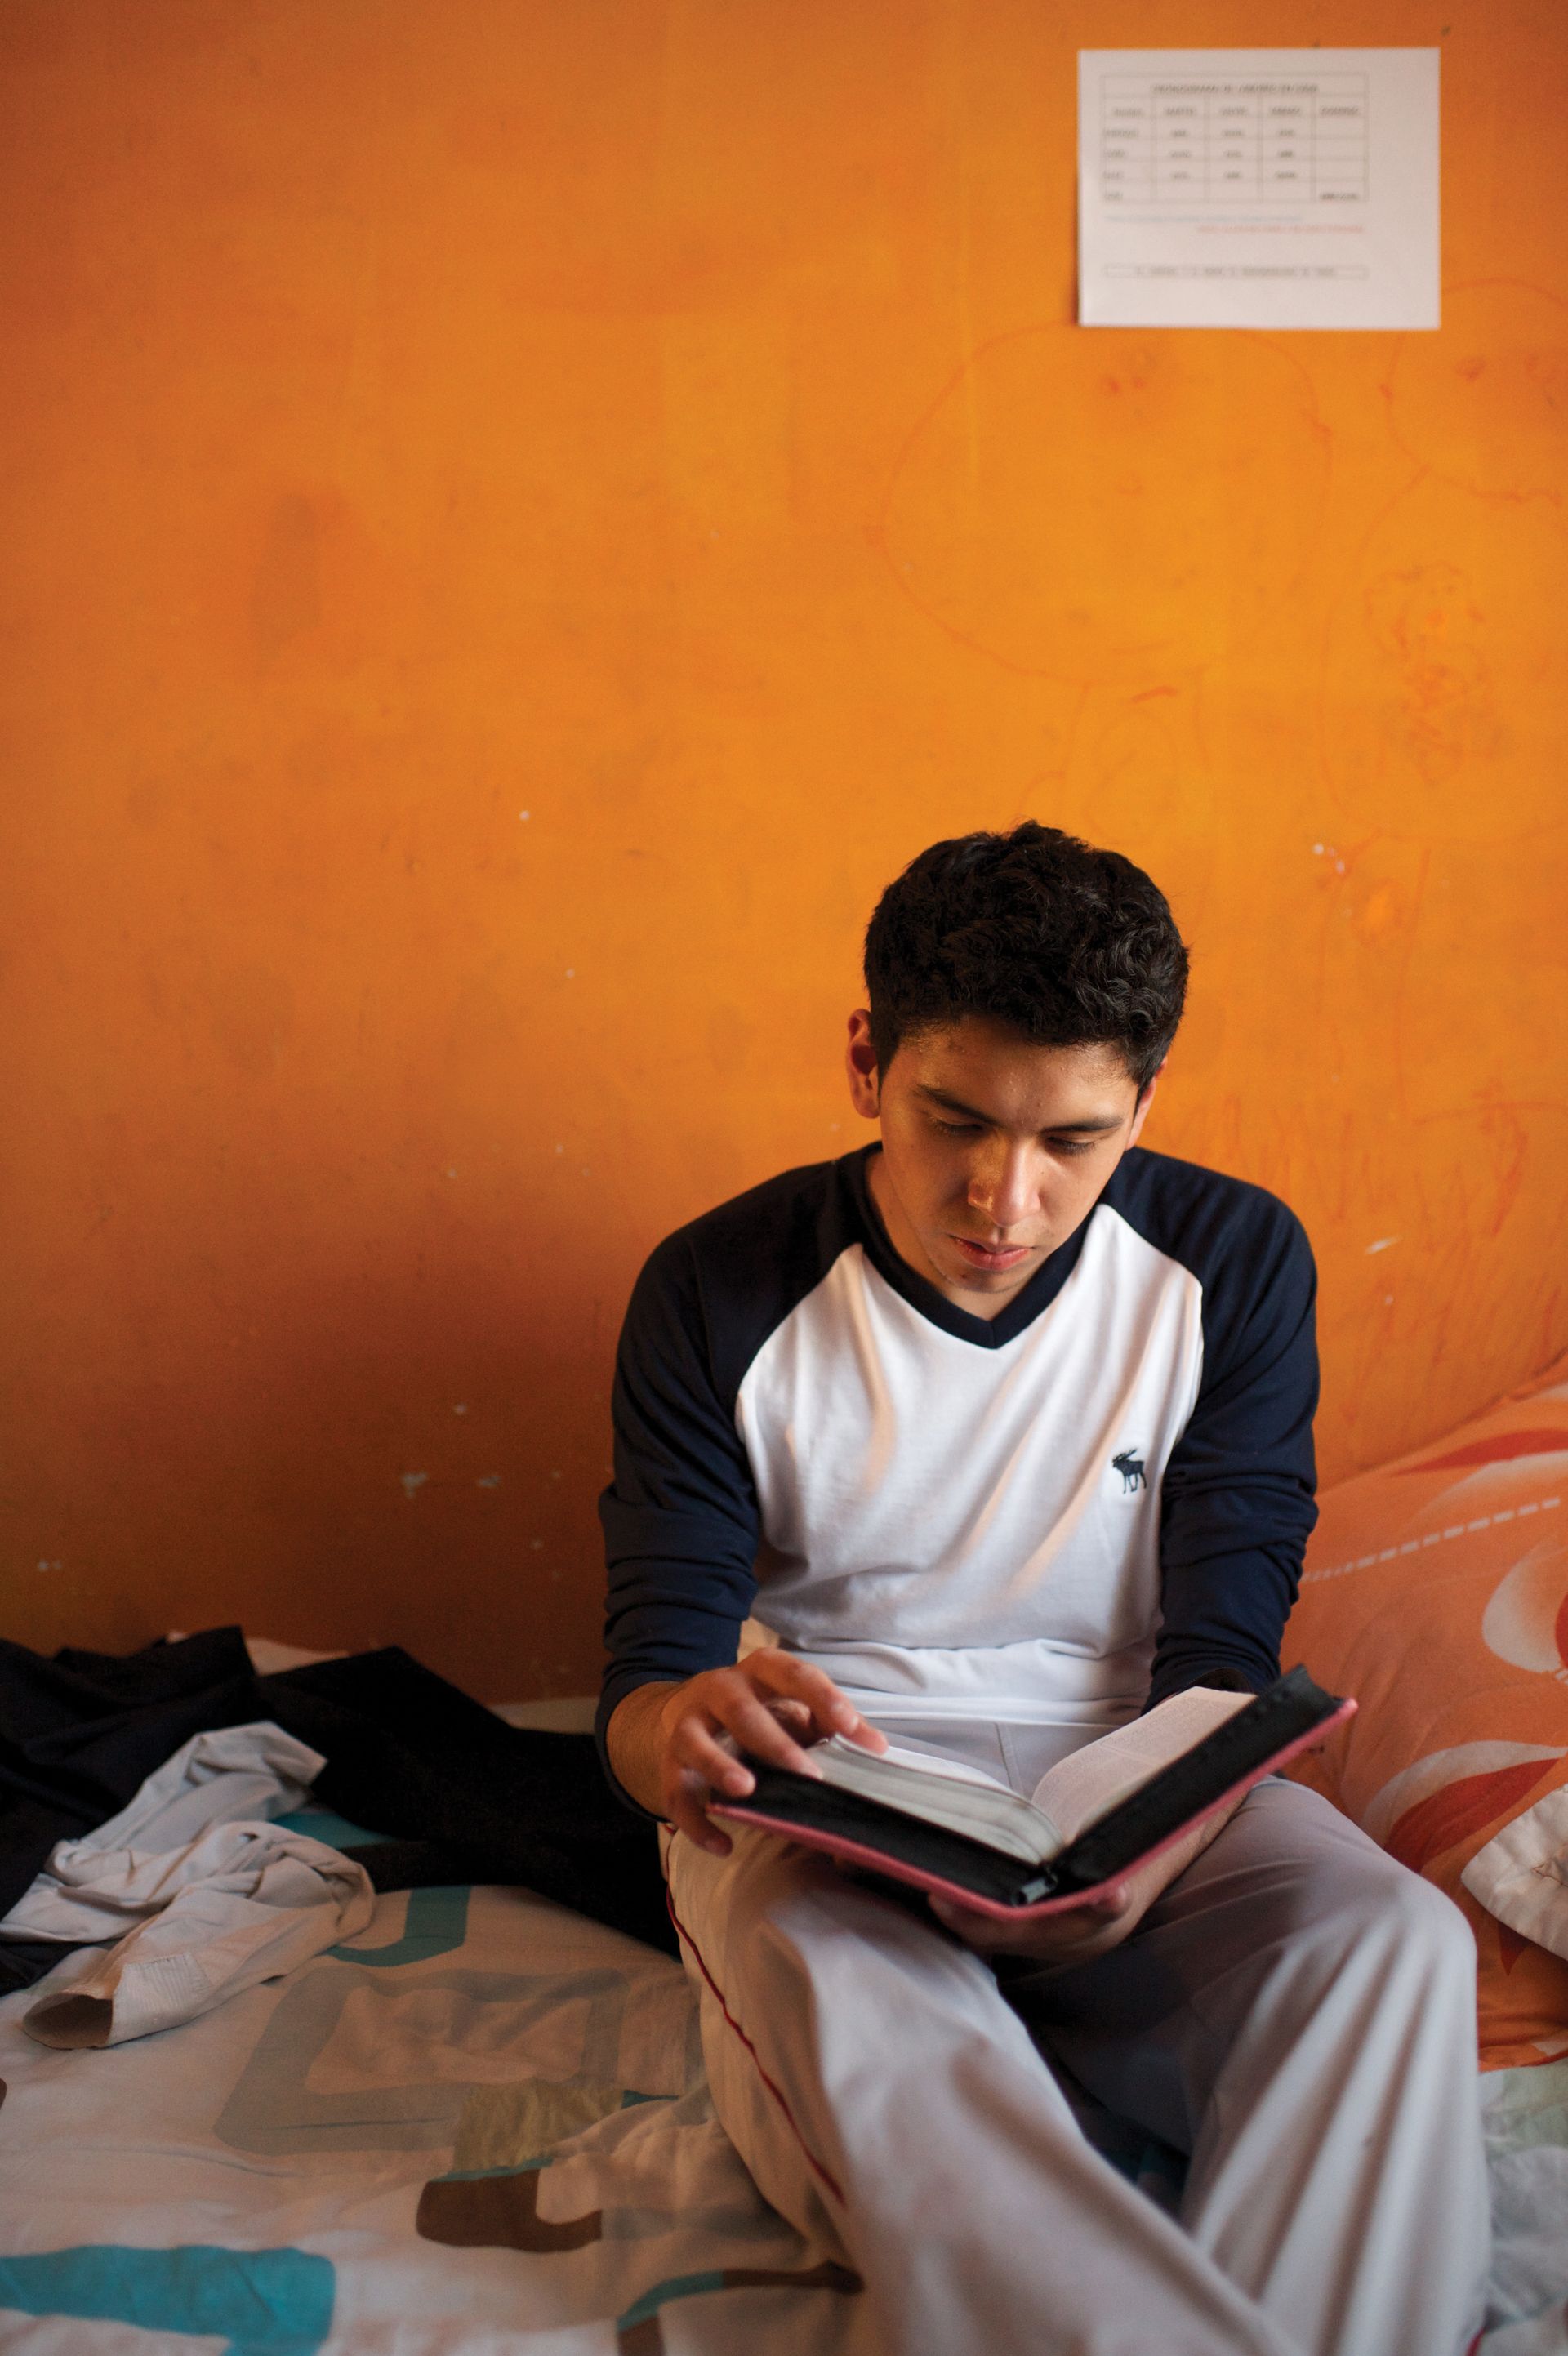 A young man sits on his bed and reads from a set of scriptures.